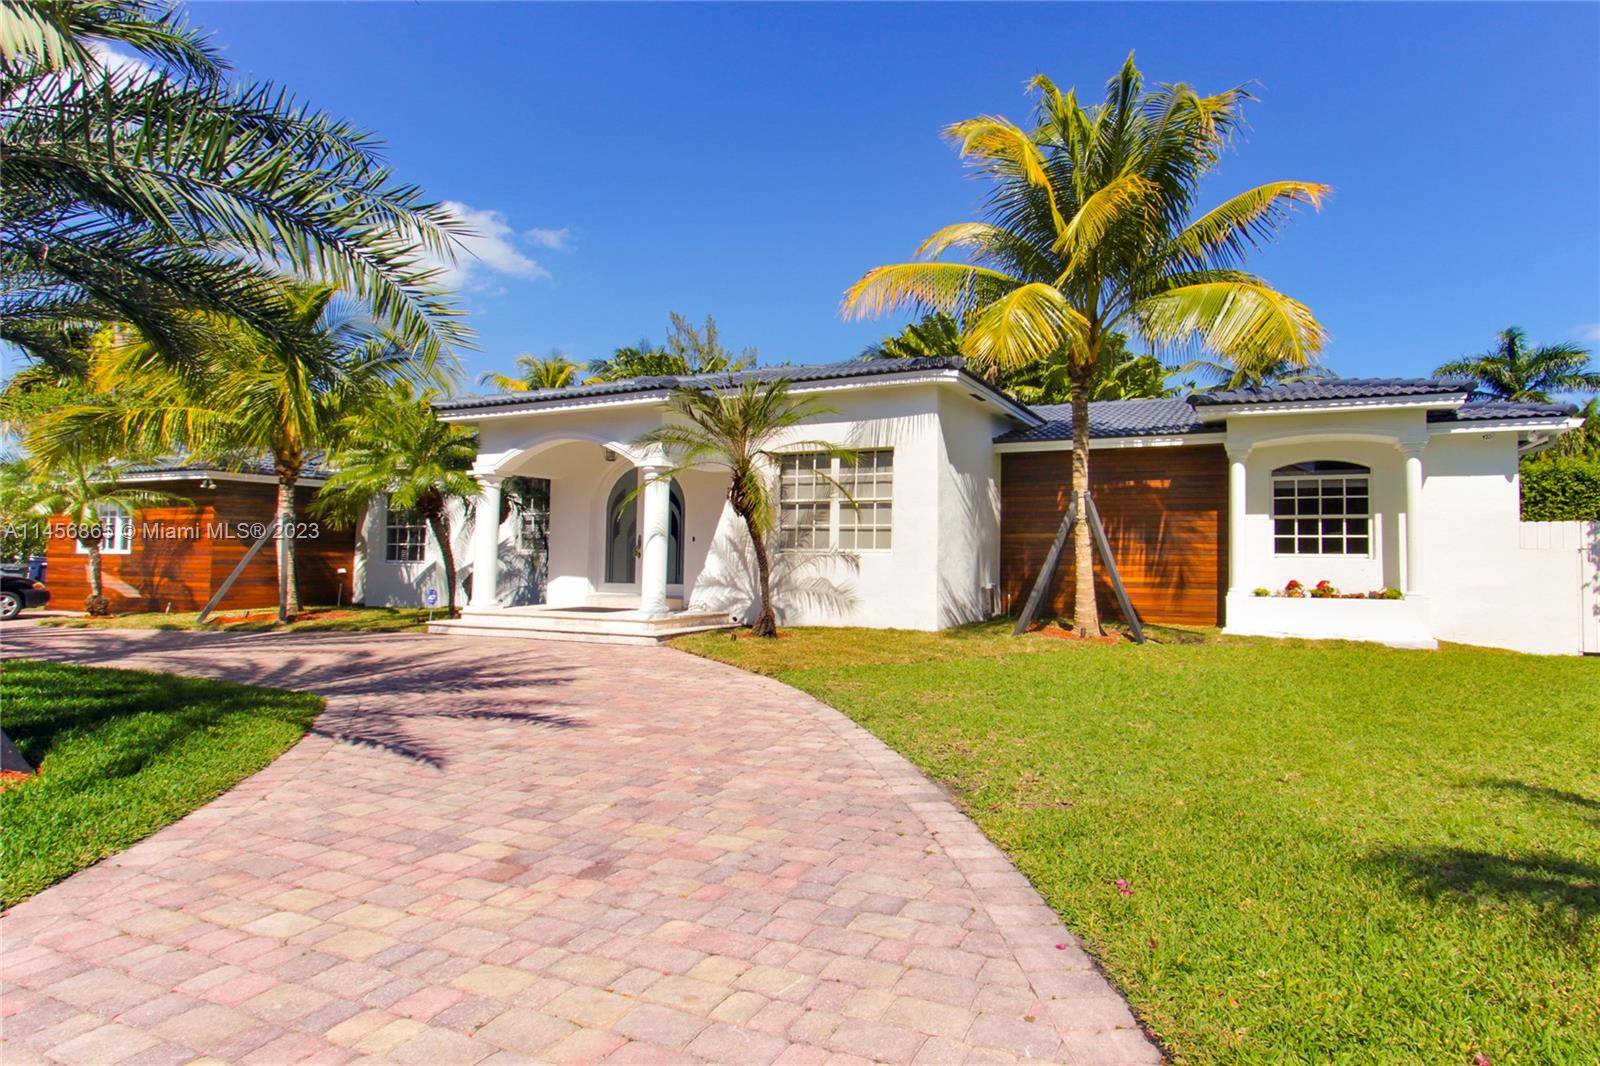 Stunning newly renovated 4 bedroom 3 bathroom on guard gated Hibiscus Island.